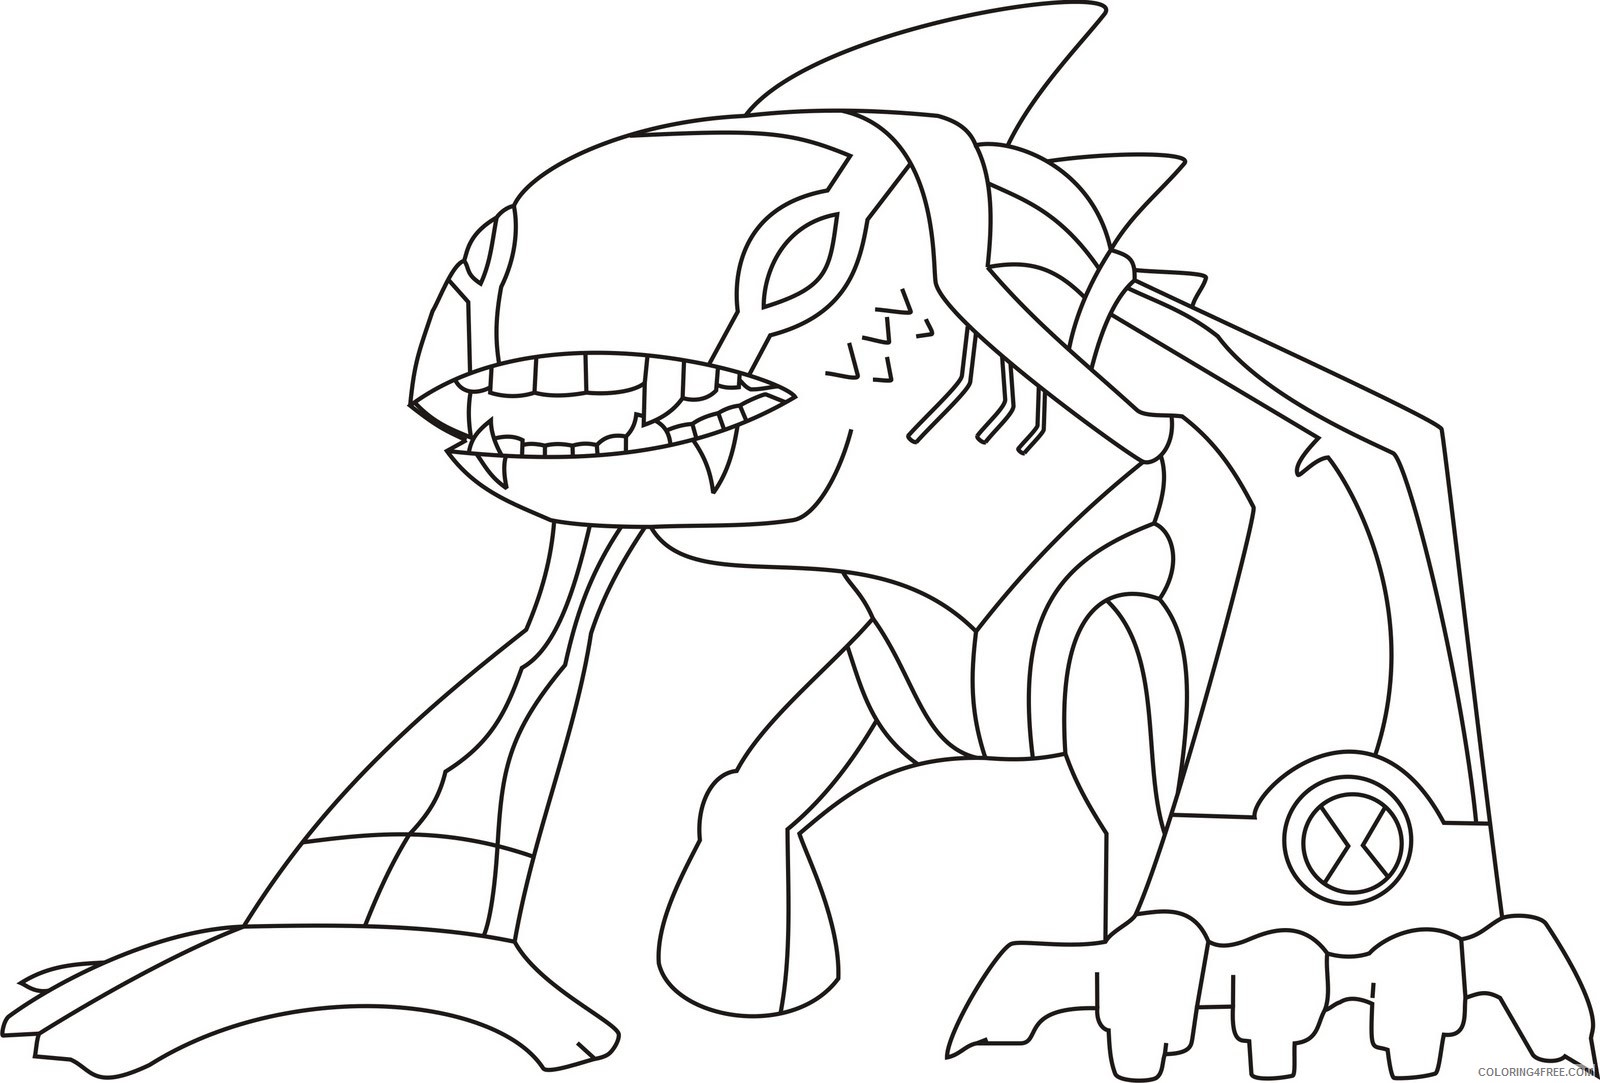 ben 10 coloring pages articguana Coloring4free